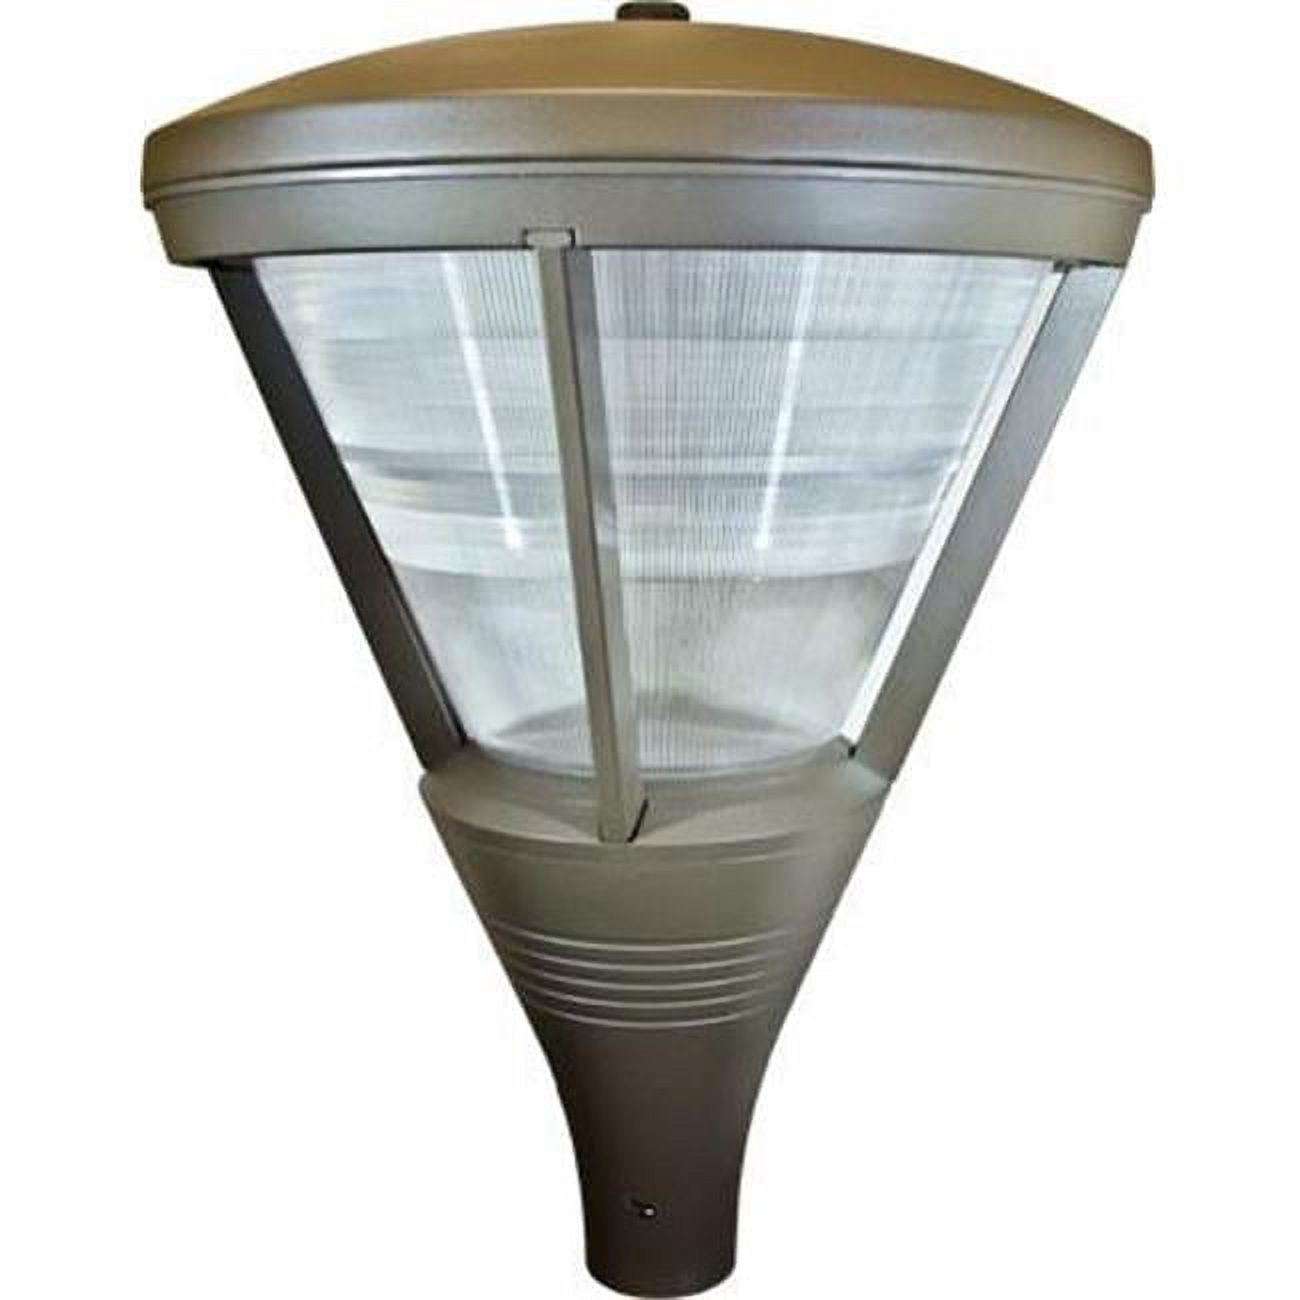 Picture of Dabmar Lighting GM586-BZ-MT Powder Coated Cast Aluminum Architectural Post Top Light Fixture, Bronze - 34.50 x 25.25 x 25.25 in.